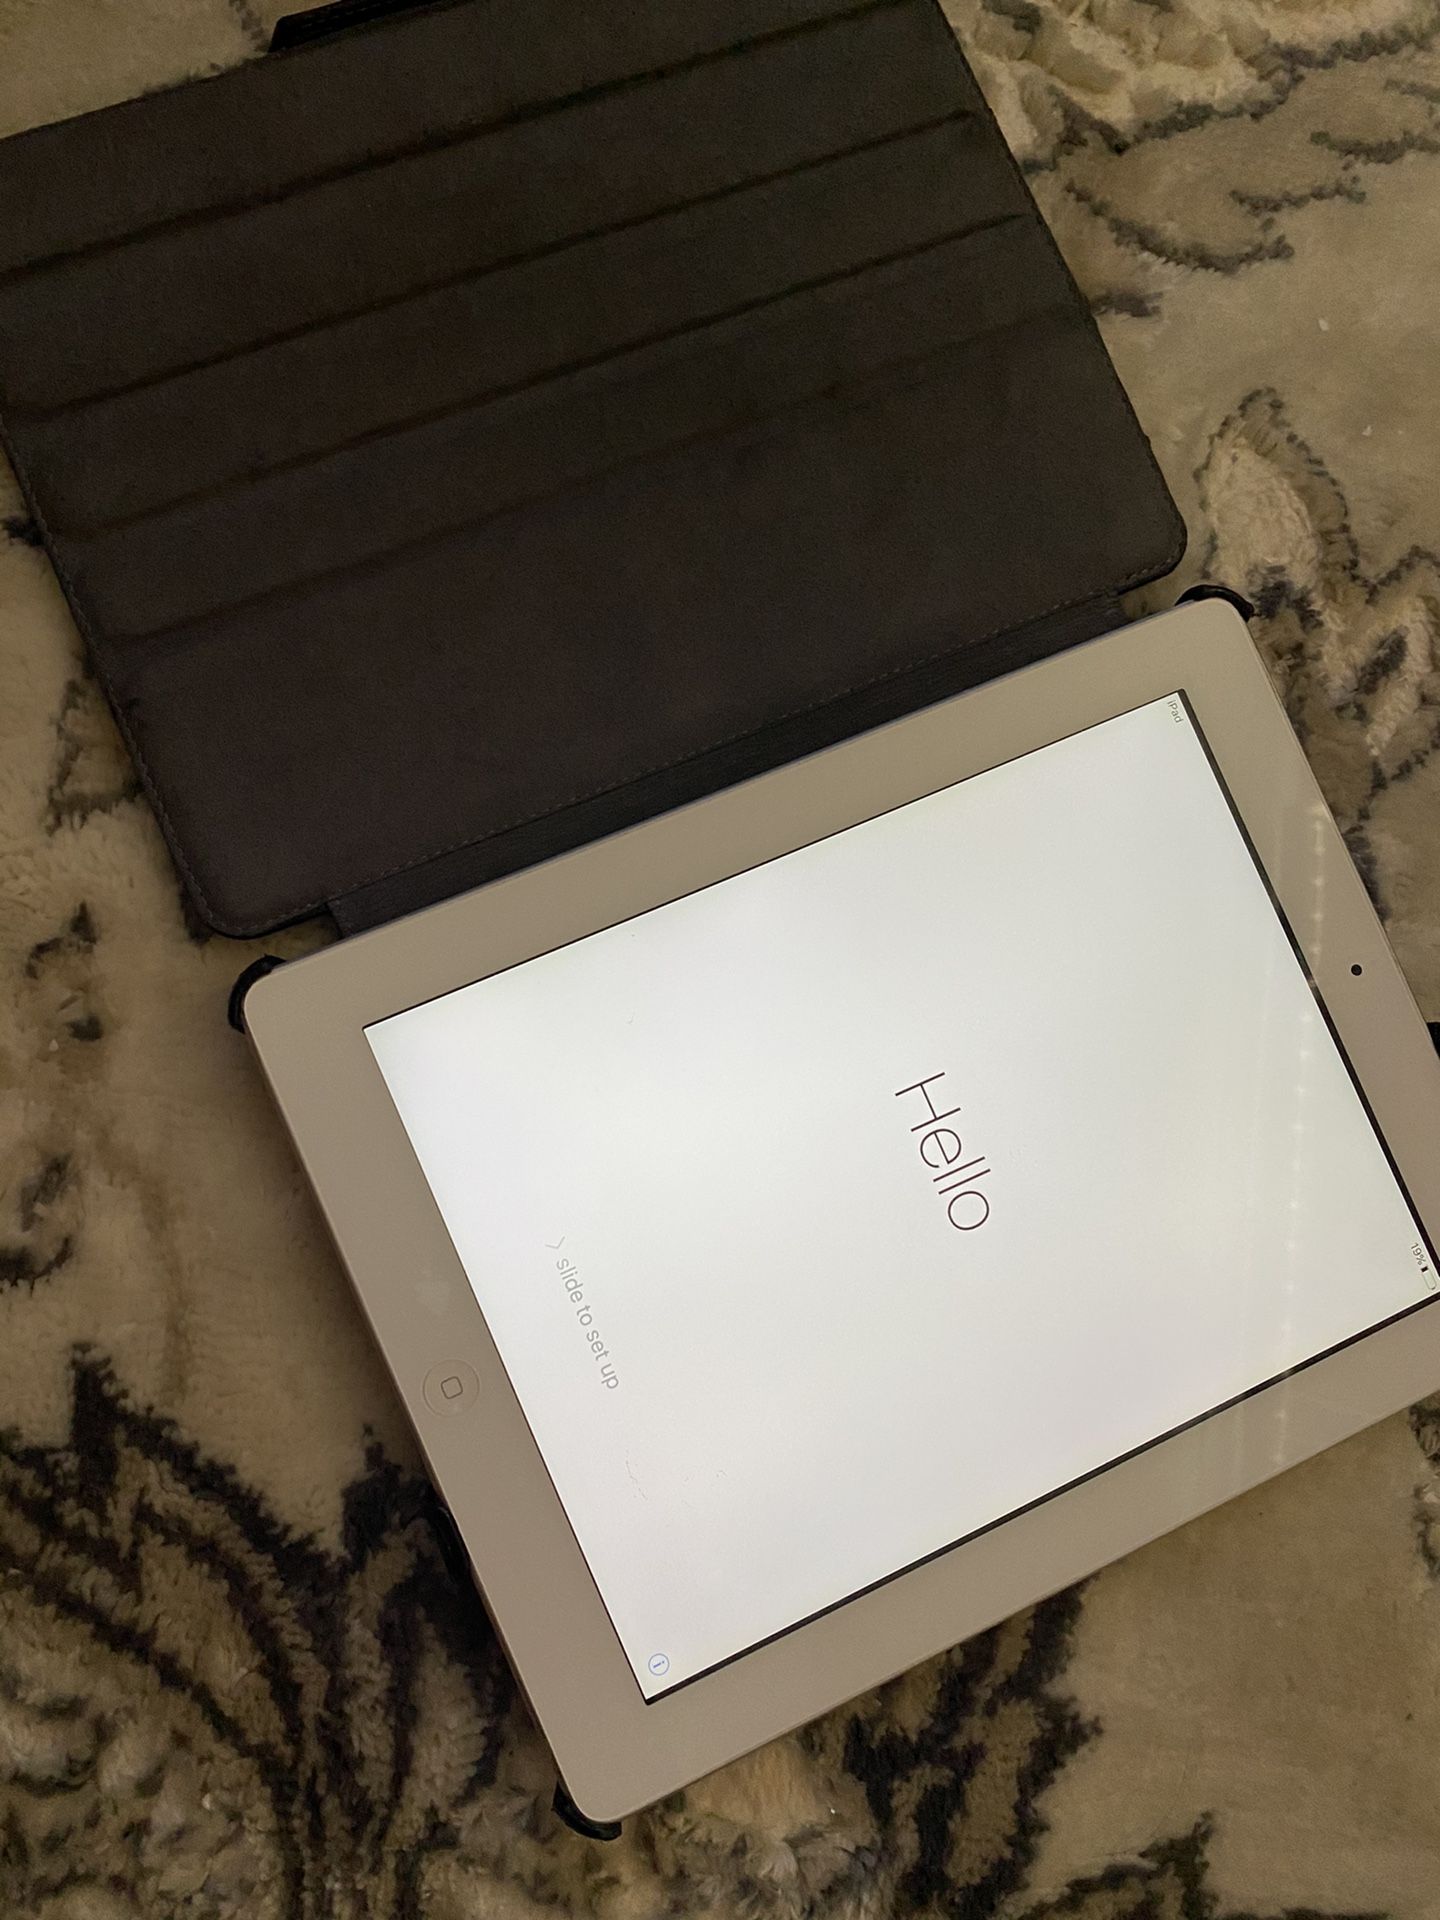 Very good, well kept condition 3rd generation iPad